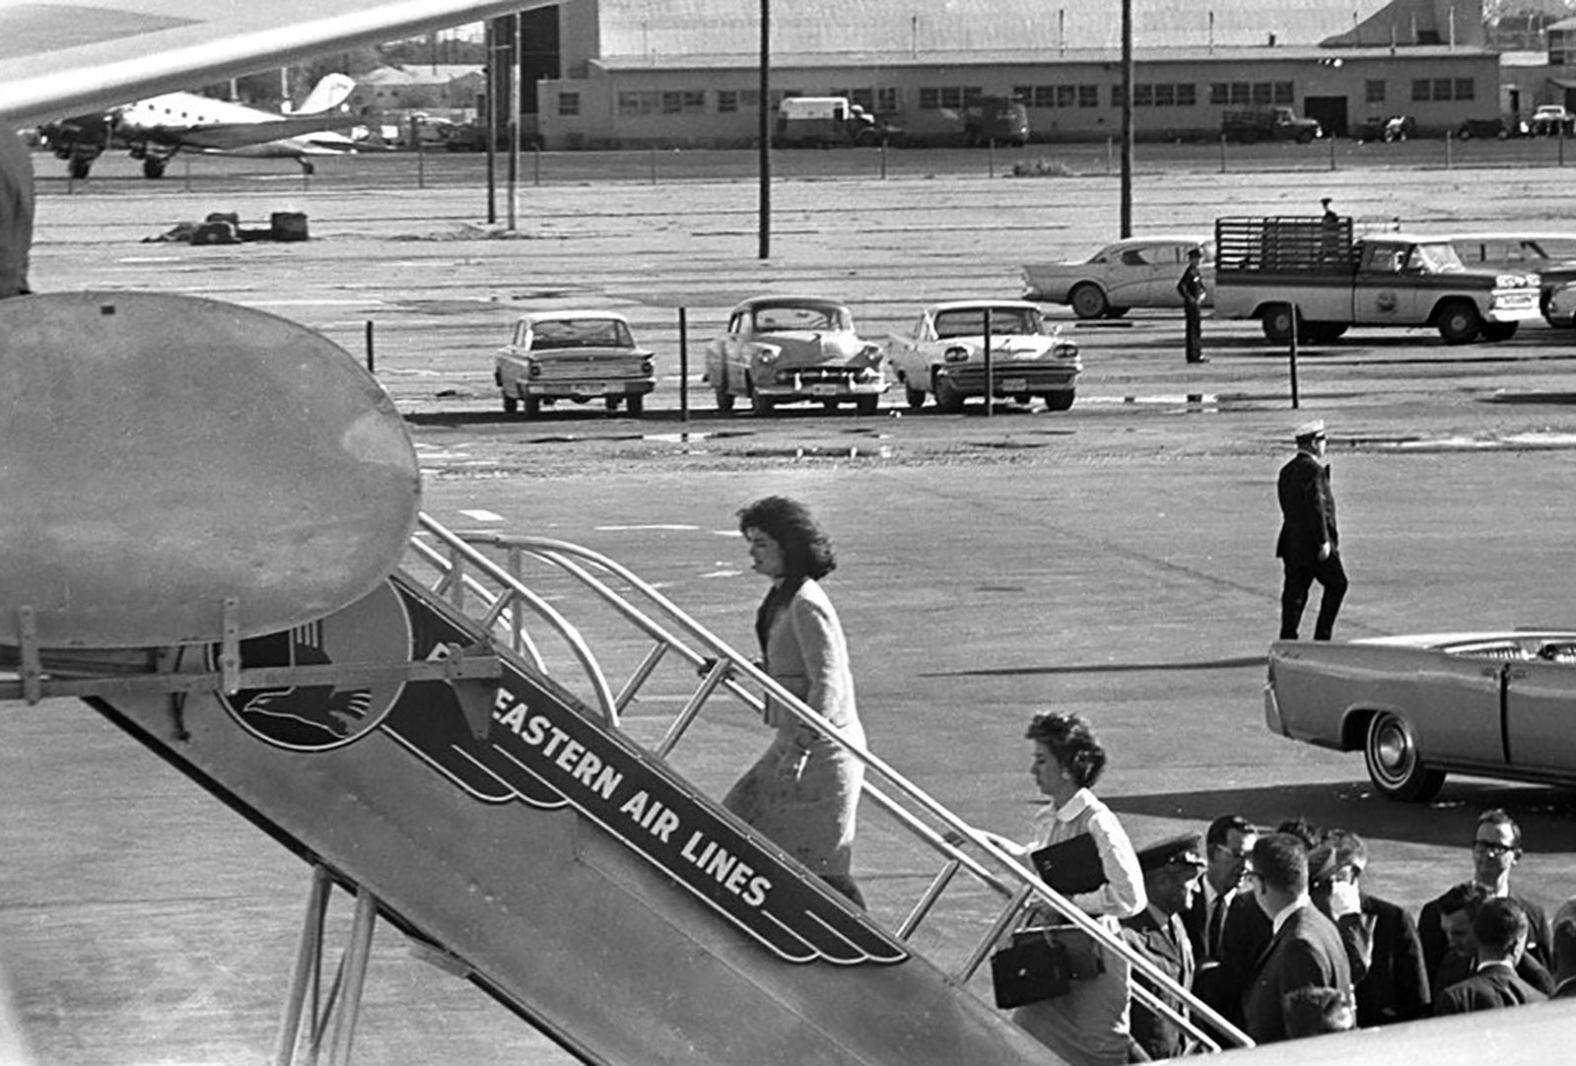 The first lady and her secretary, Mary Gallagher, board Air Force One after the transfer of Kennedy's casket to the airplane.